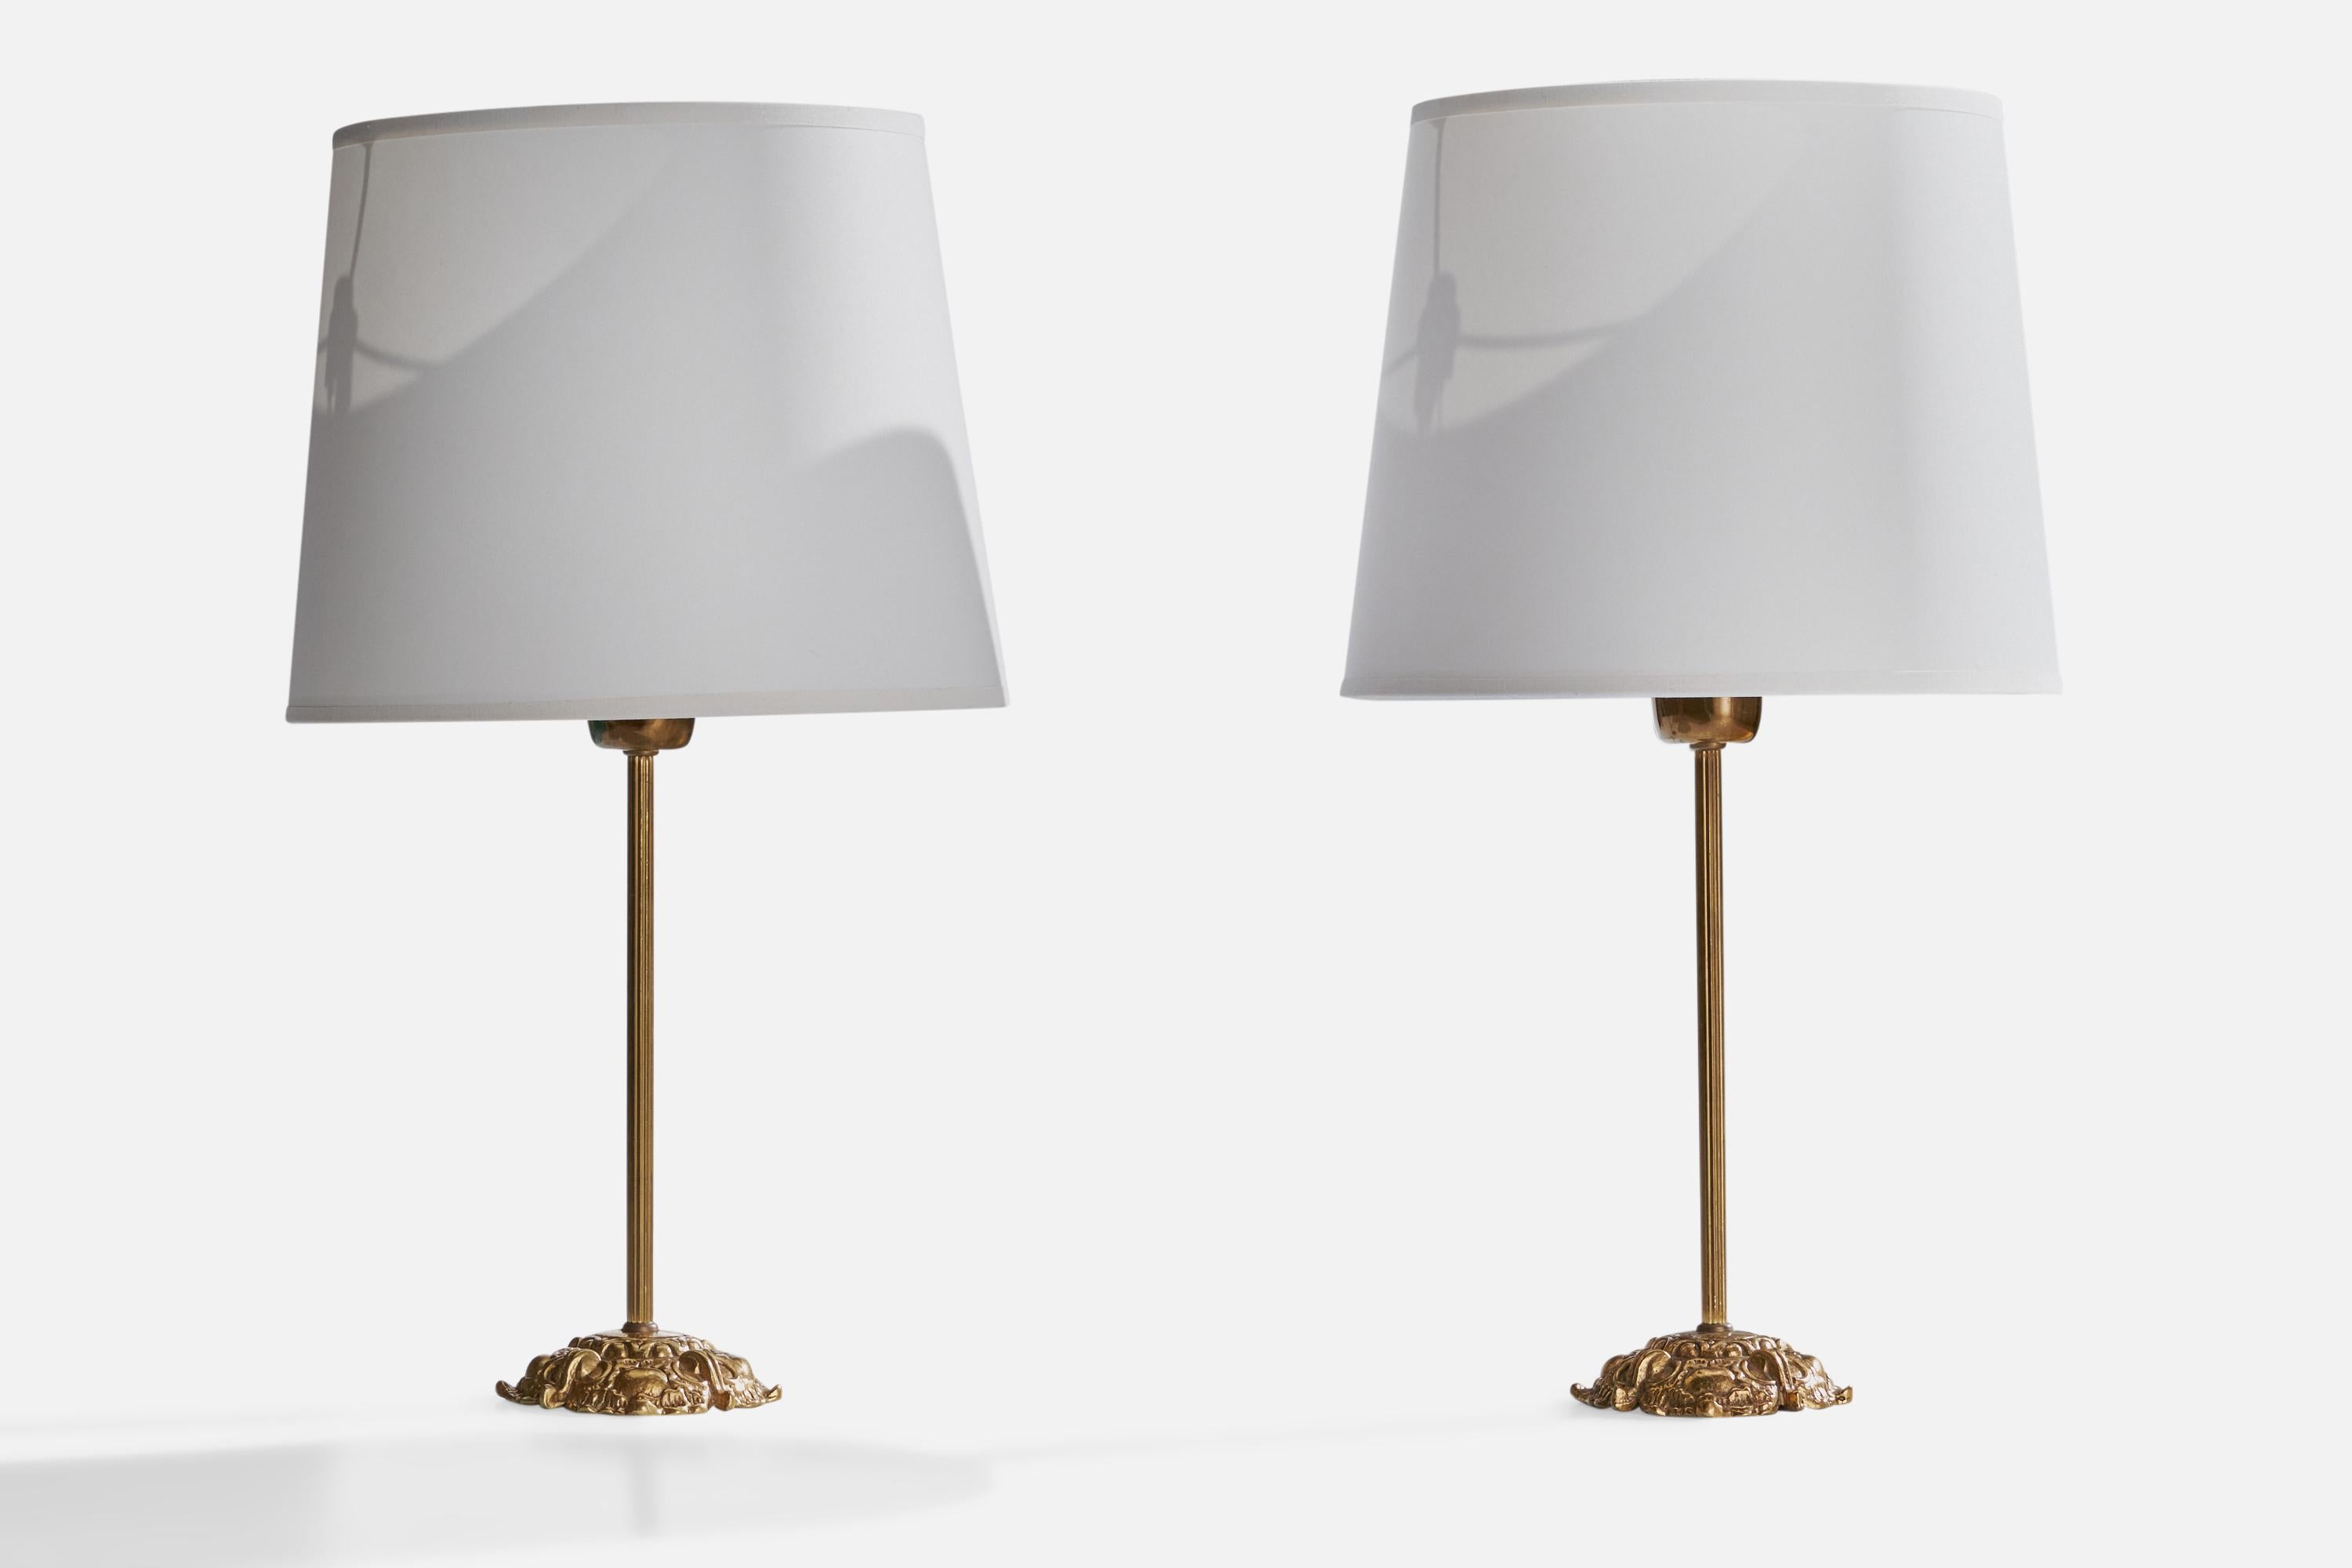 A pair of brass table lamps designed and produced by EWÅ Värnamo, Sweden, 1960s.

Dimensions of Lamp (inches): 12.25” H x 4” Diameter
Dimensions of Shade (inches): 8”  Top Diameter x 10” Bottom Diameter x 8” H
Dimensions of Lamp with Shade (inches):